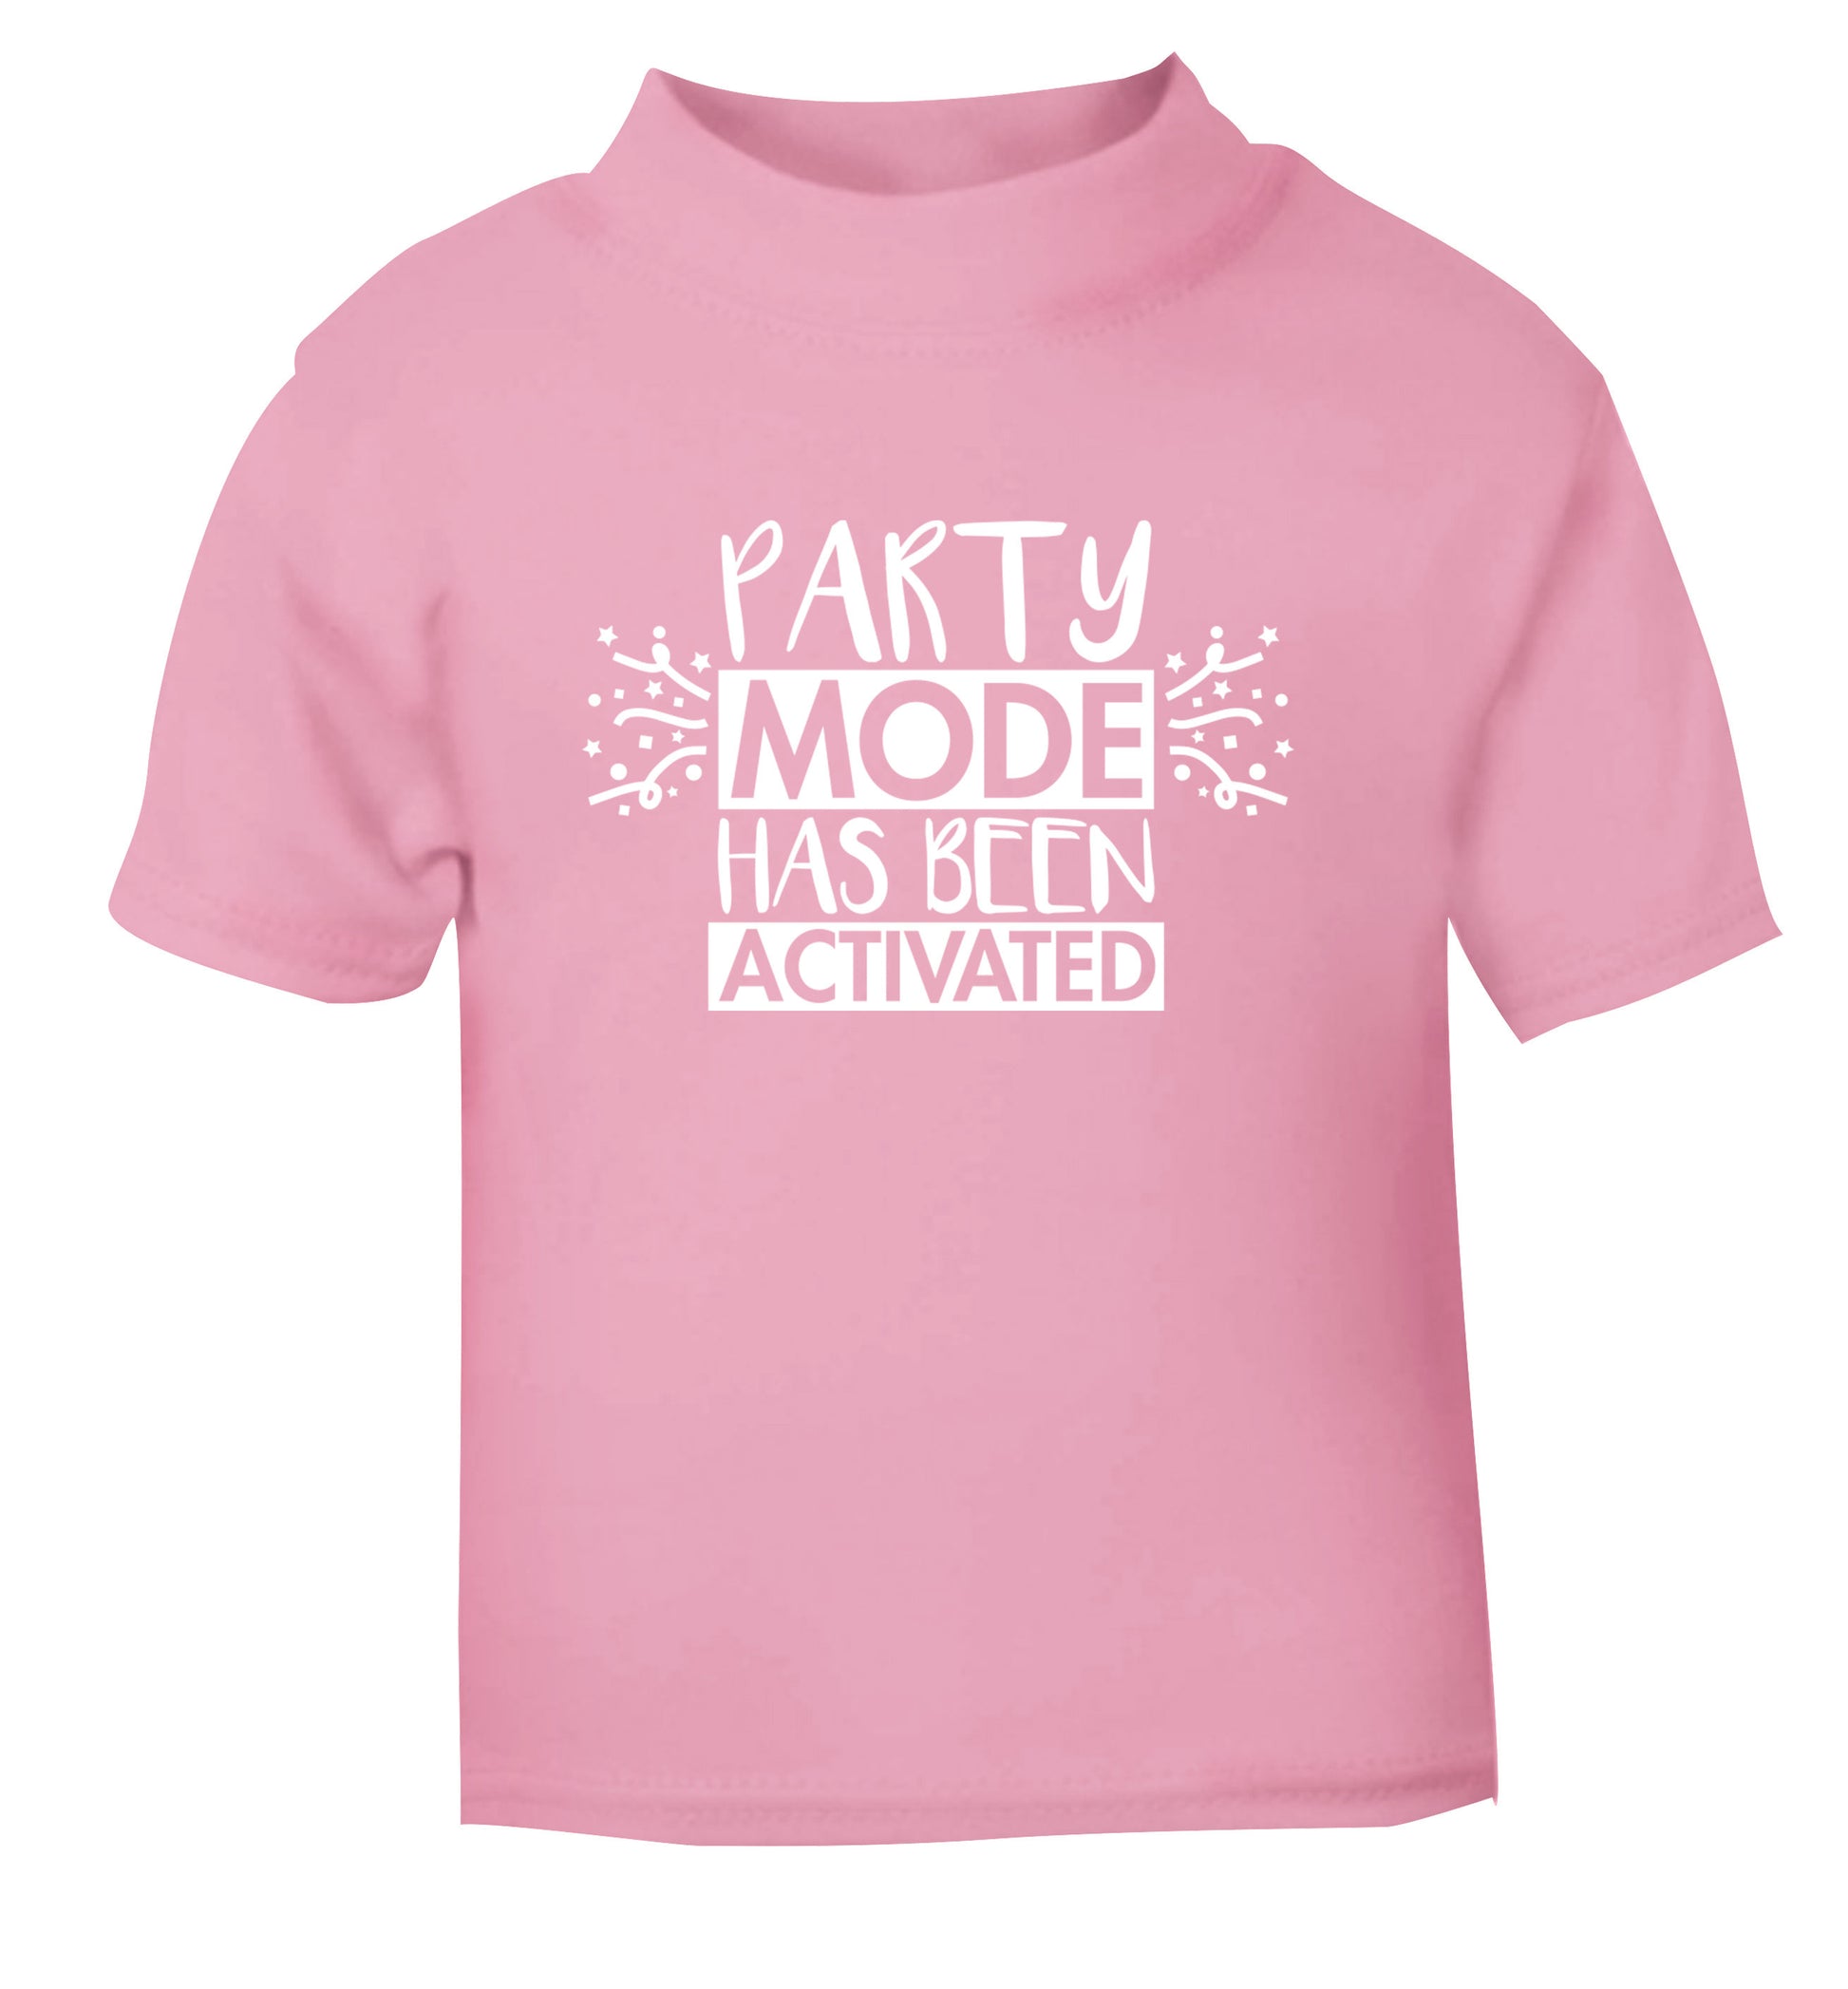 Please do not disturb party mode has been activated light pink Baby Toddler Tshirt 2 Years